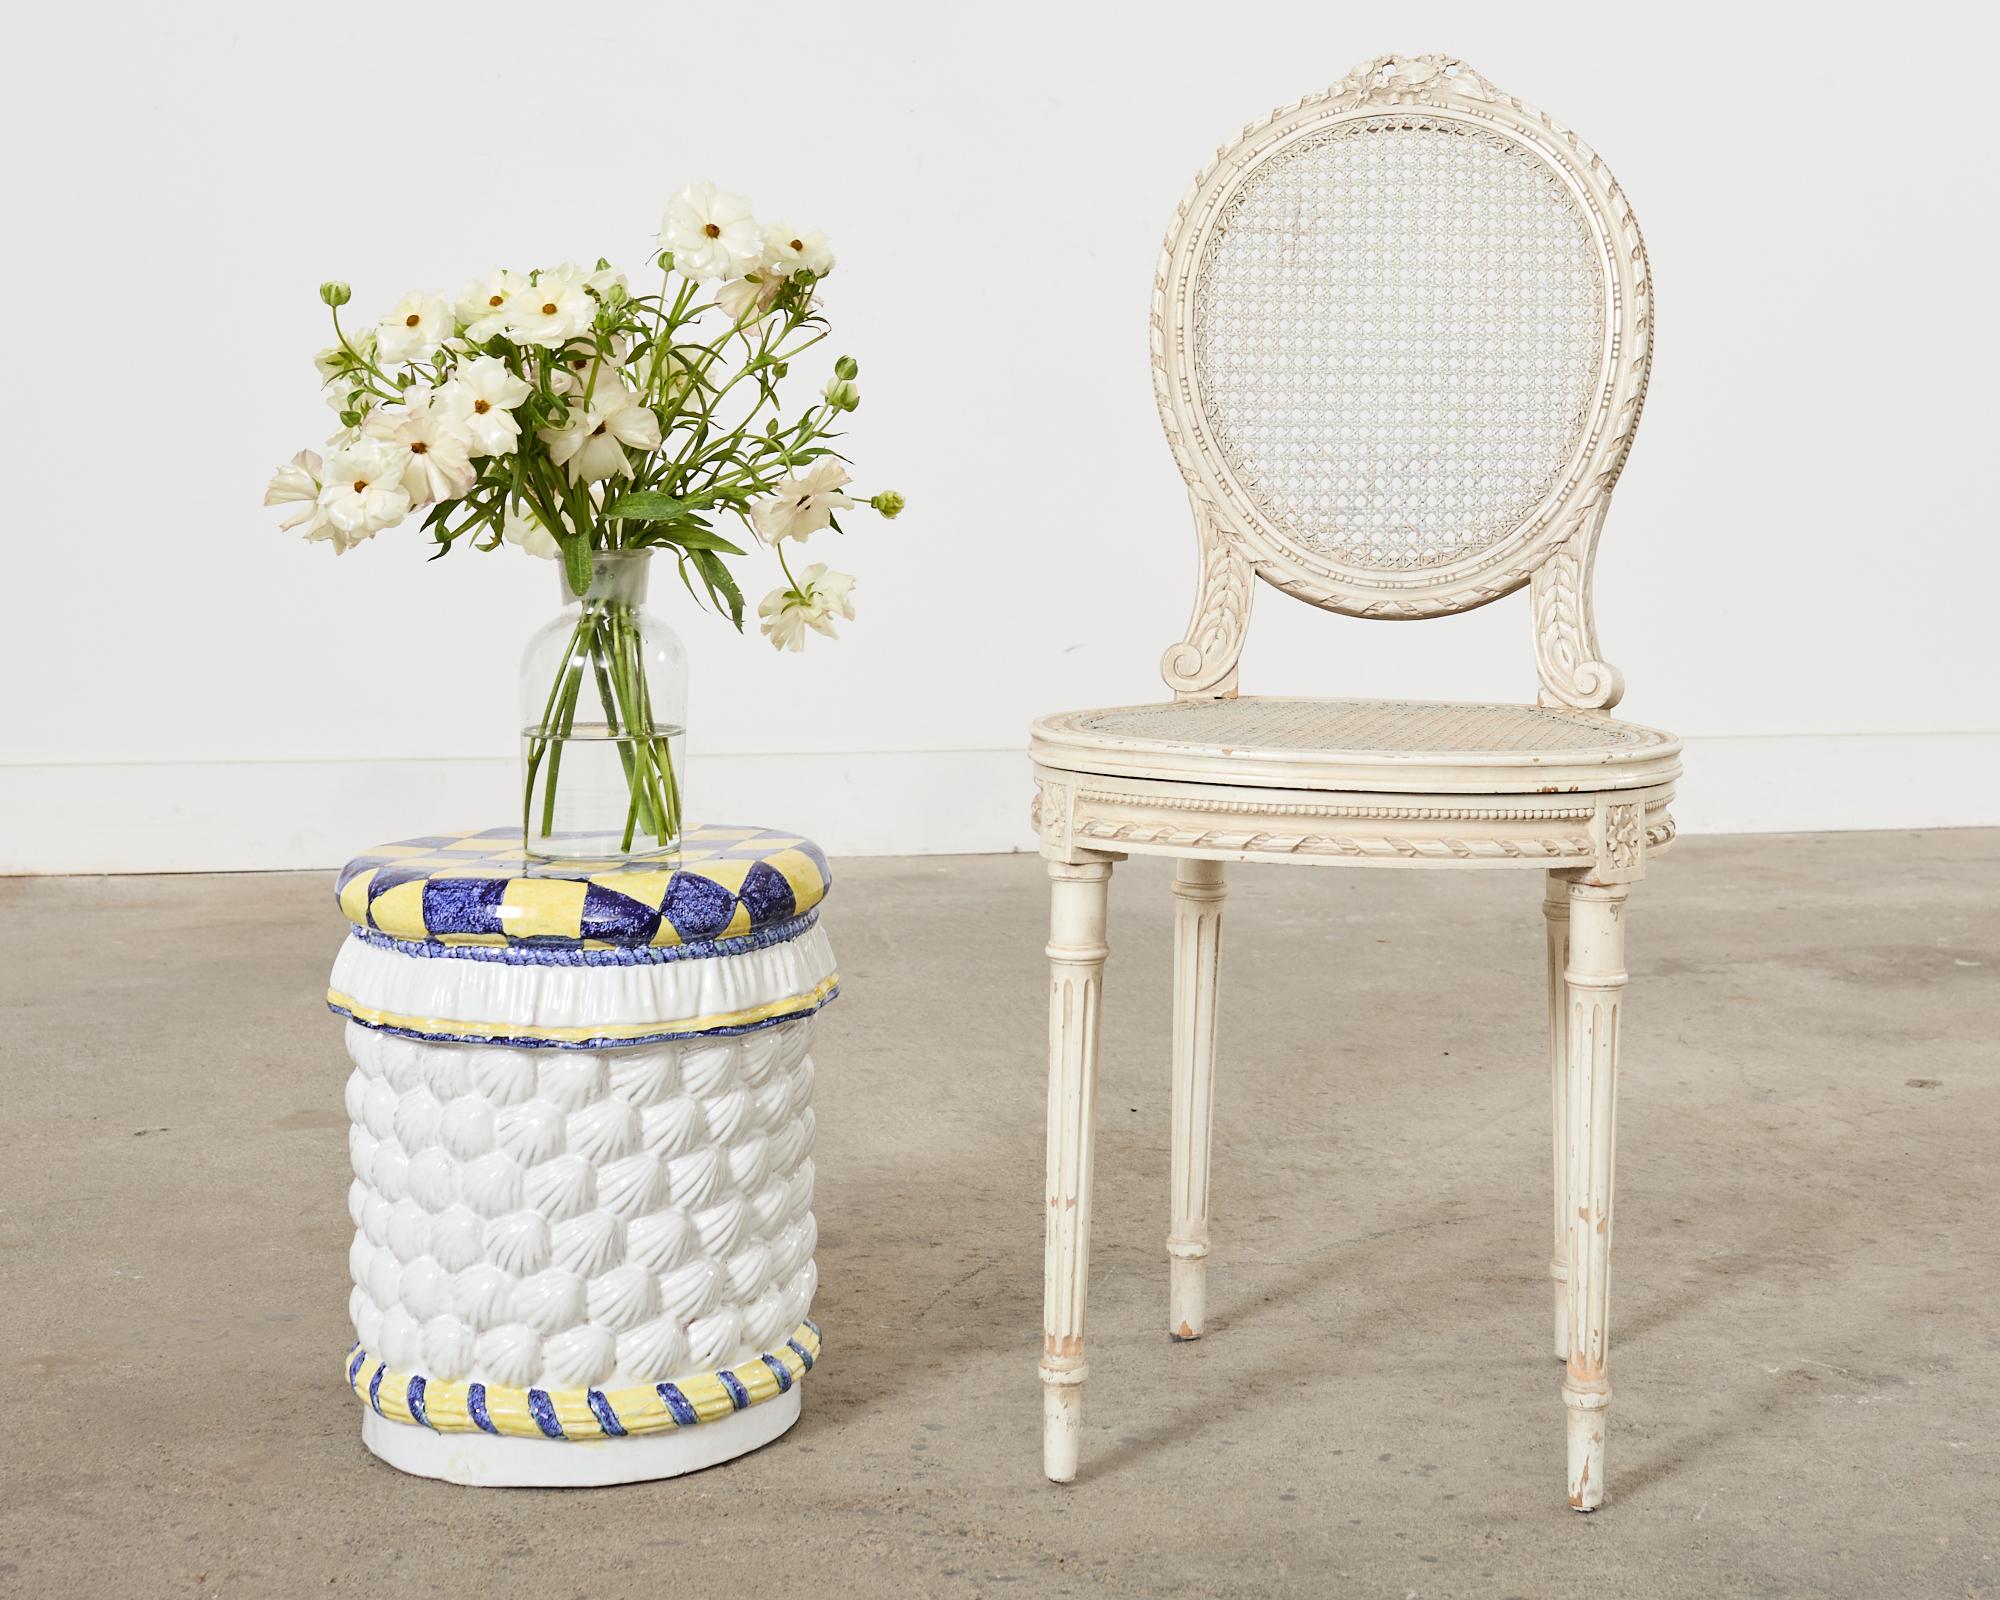 Whimsical 20th century Italian glazed ceramic garden stool or drinks table featuring a trompe l'oeil seashell veneered form. The top has a harlequin diamond pattern painted in citron yellow and blue. The seat has a skirted ruffle border on the top